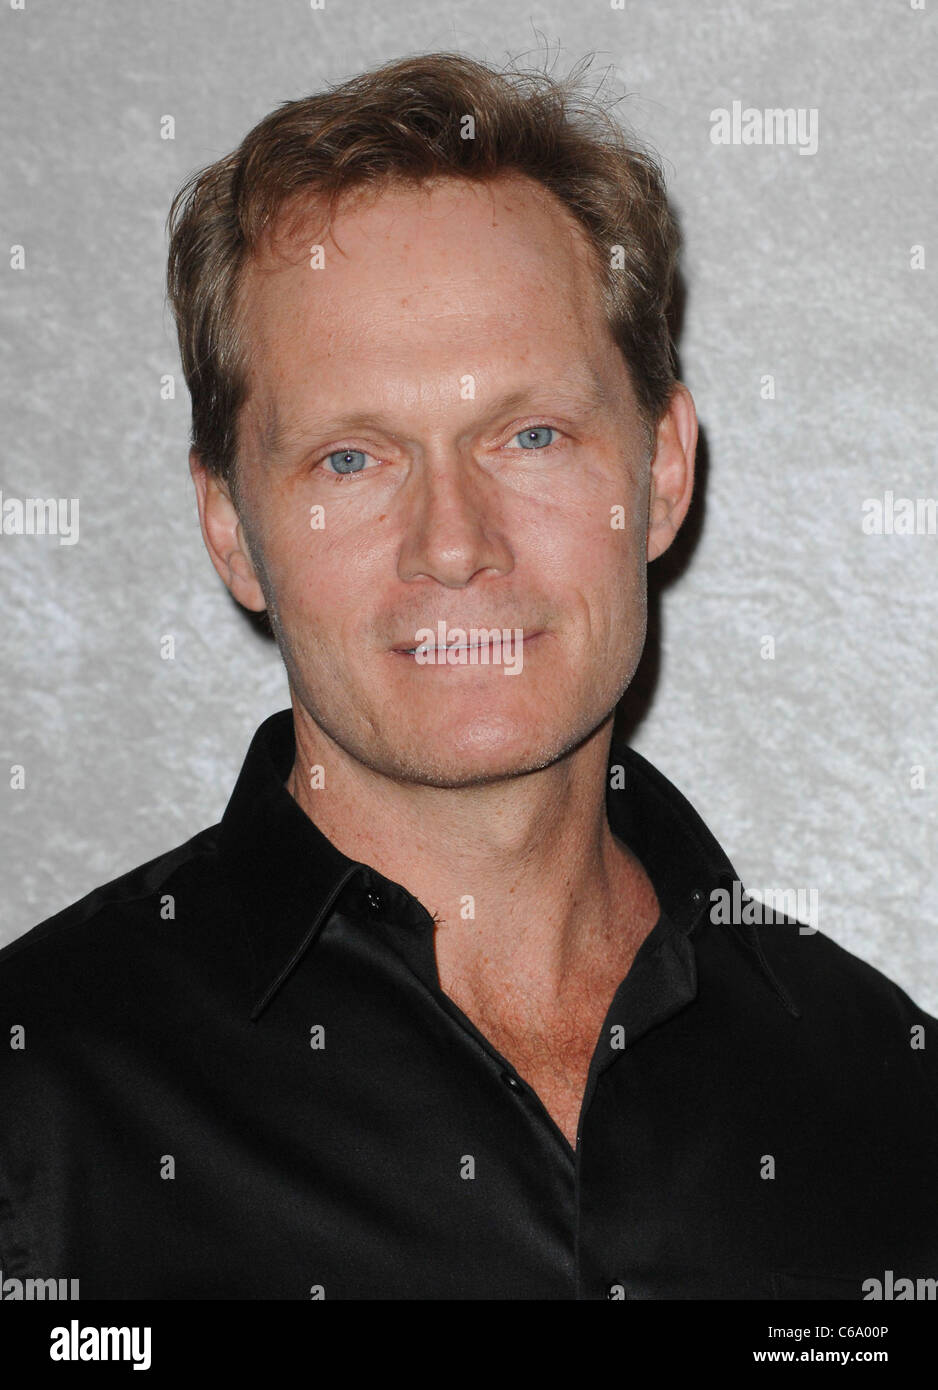 Tom Schanley at arrivals for BIG LOVE Season Premiere on HBO, Directors Guild of America (DGA) Theater, Los Angeles, CA January Stock Photo